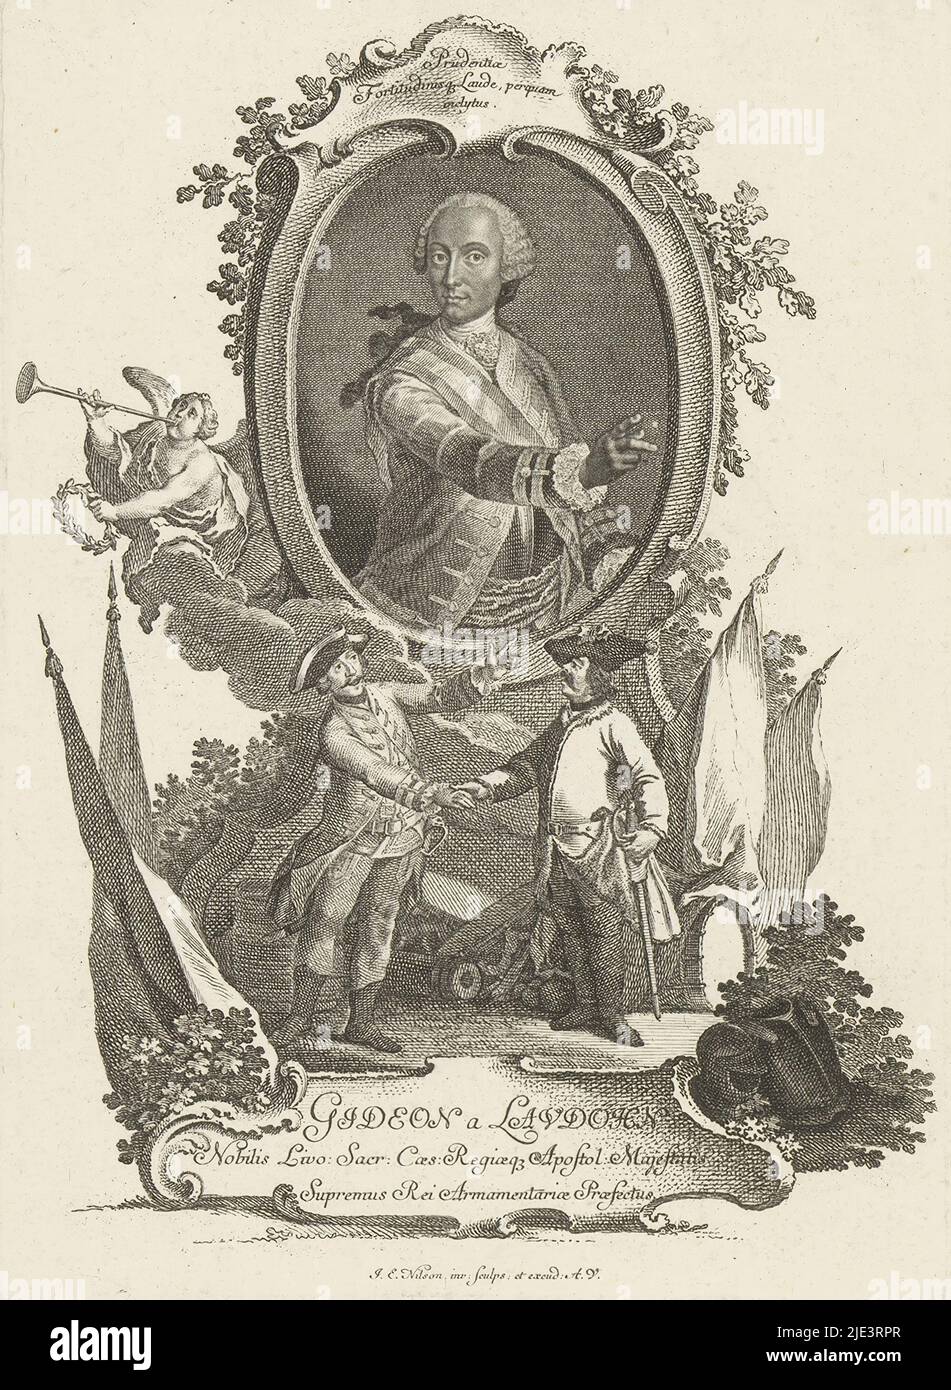 Portrait of Gideon Ernst von Laudon, print maker: Johann Esaias Nilson, (mentioned on object), Augsburg, 1731 - 1788, paper, engraving, etching, h 220 mm - w 158 mm Stock Photo